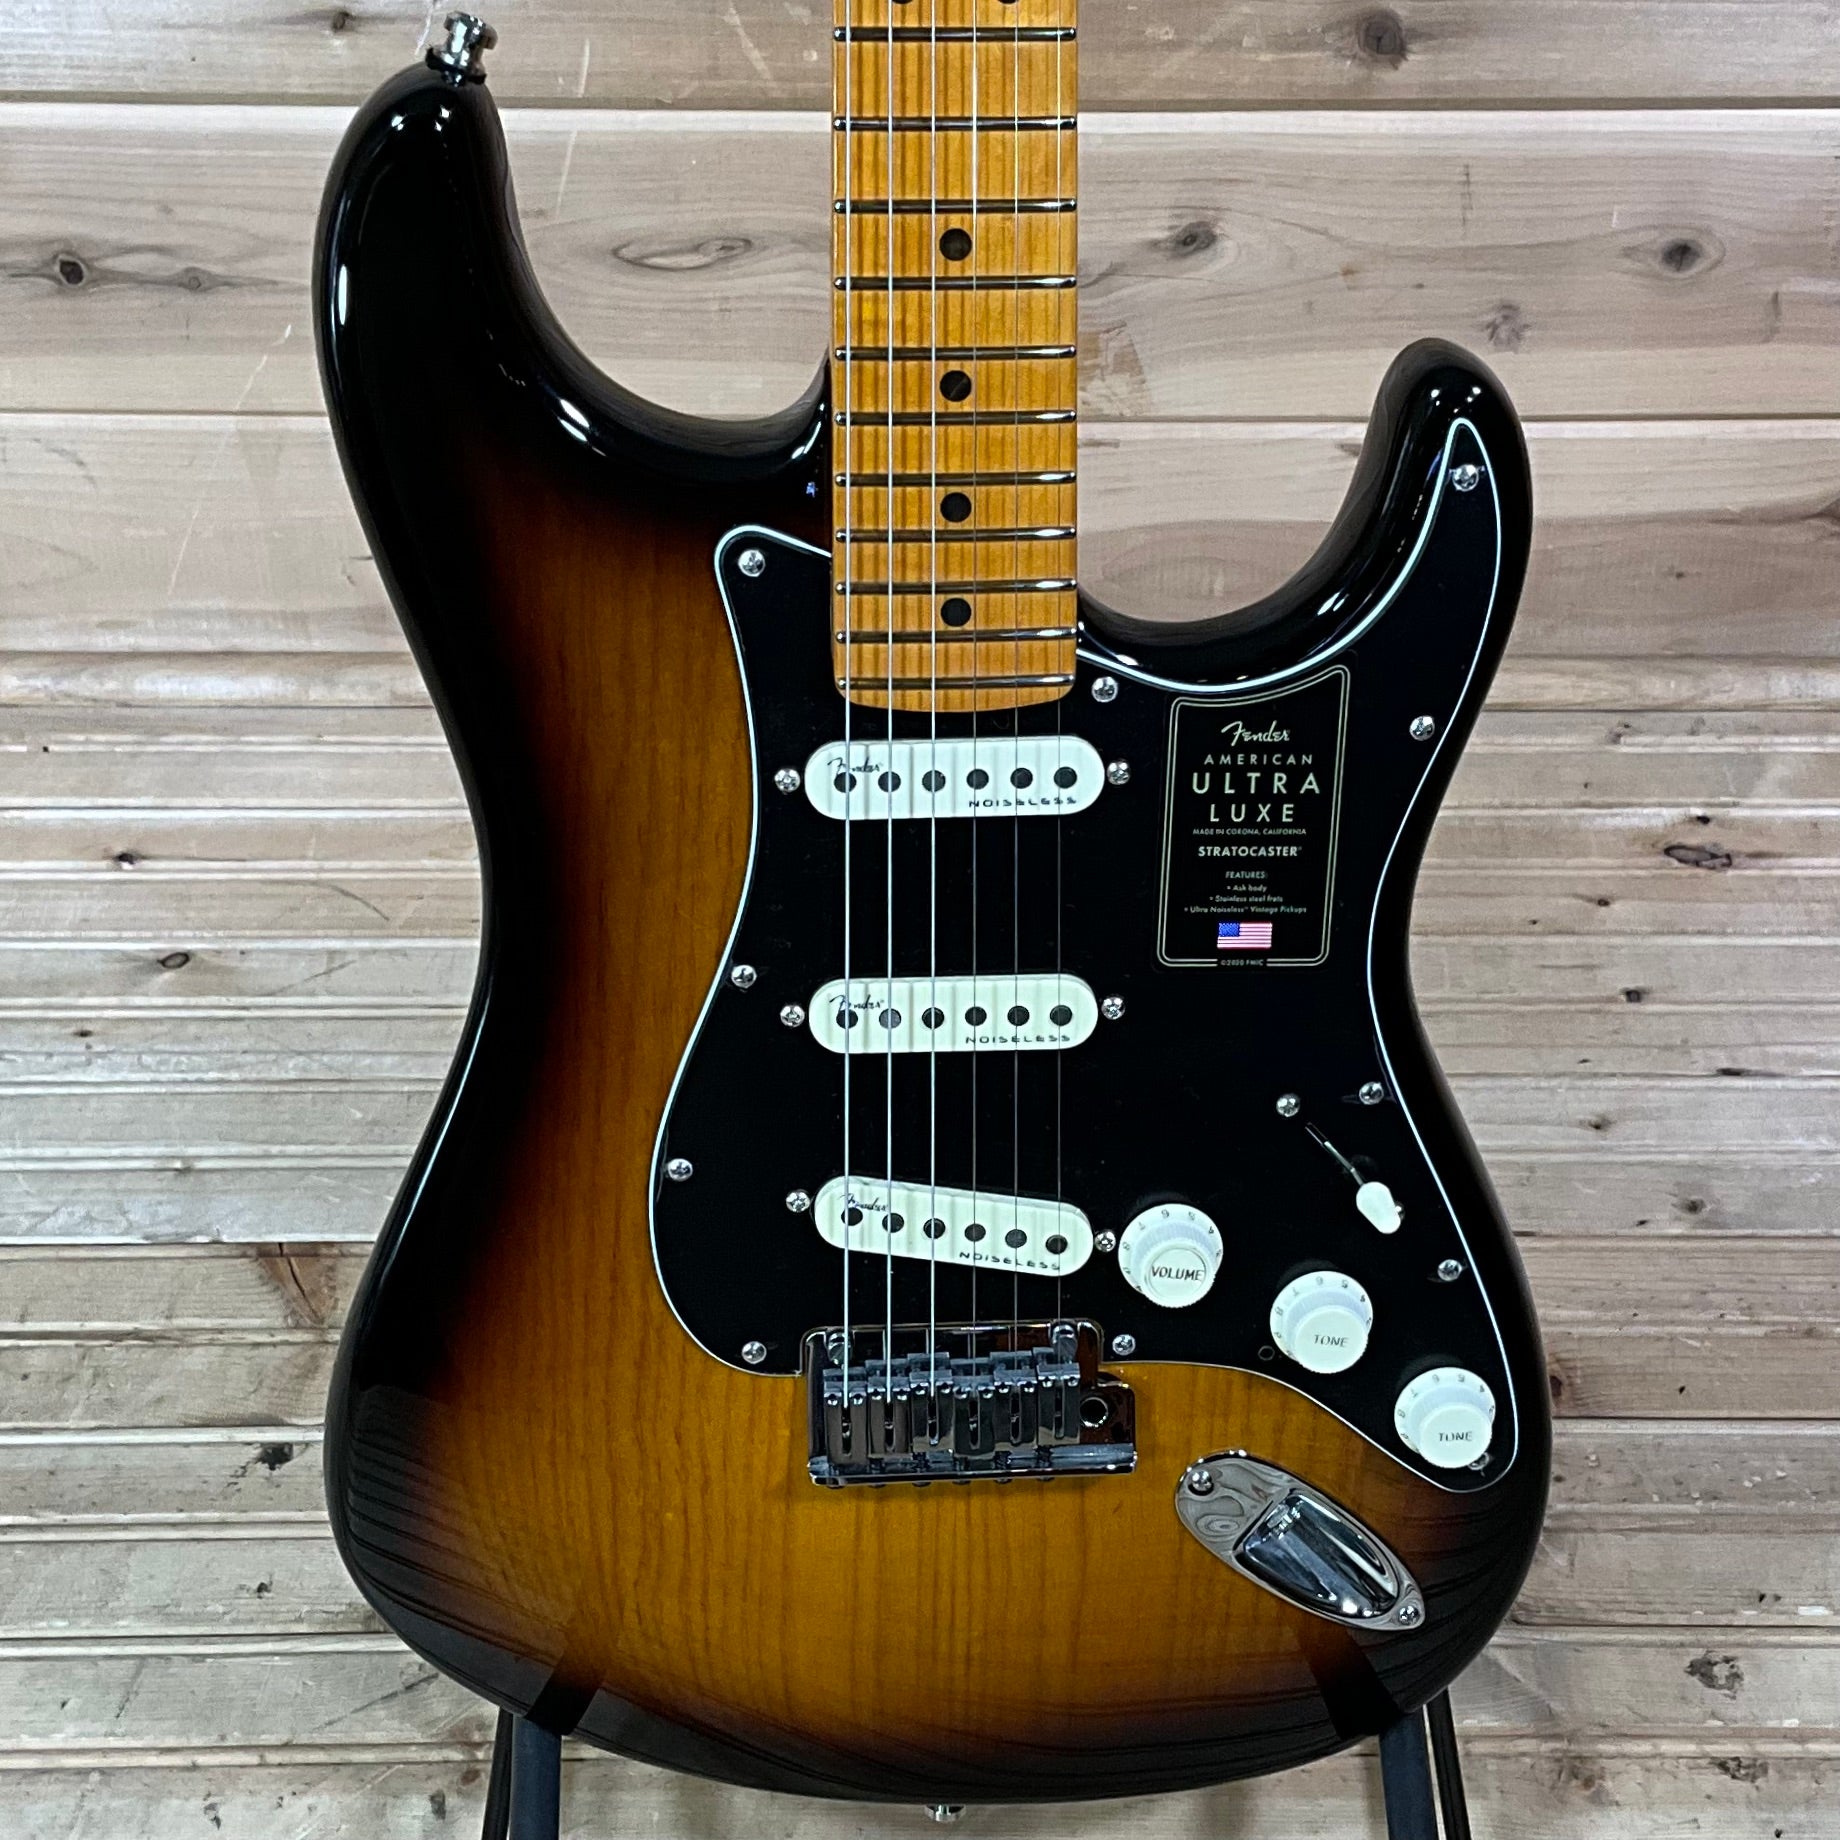 Fender American Ultra Luxe Stratocaster Electric Guitar USED - 2 Color -  Huber Breese Music